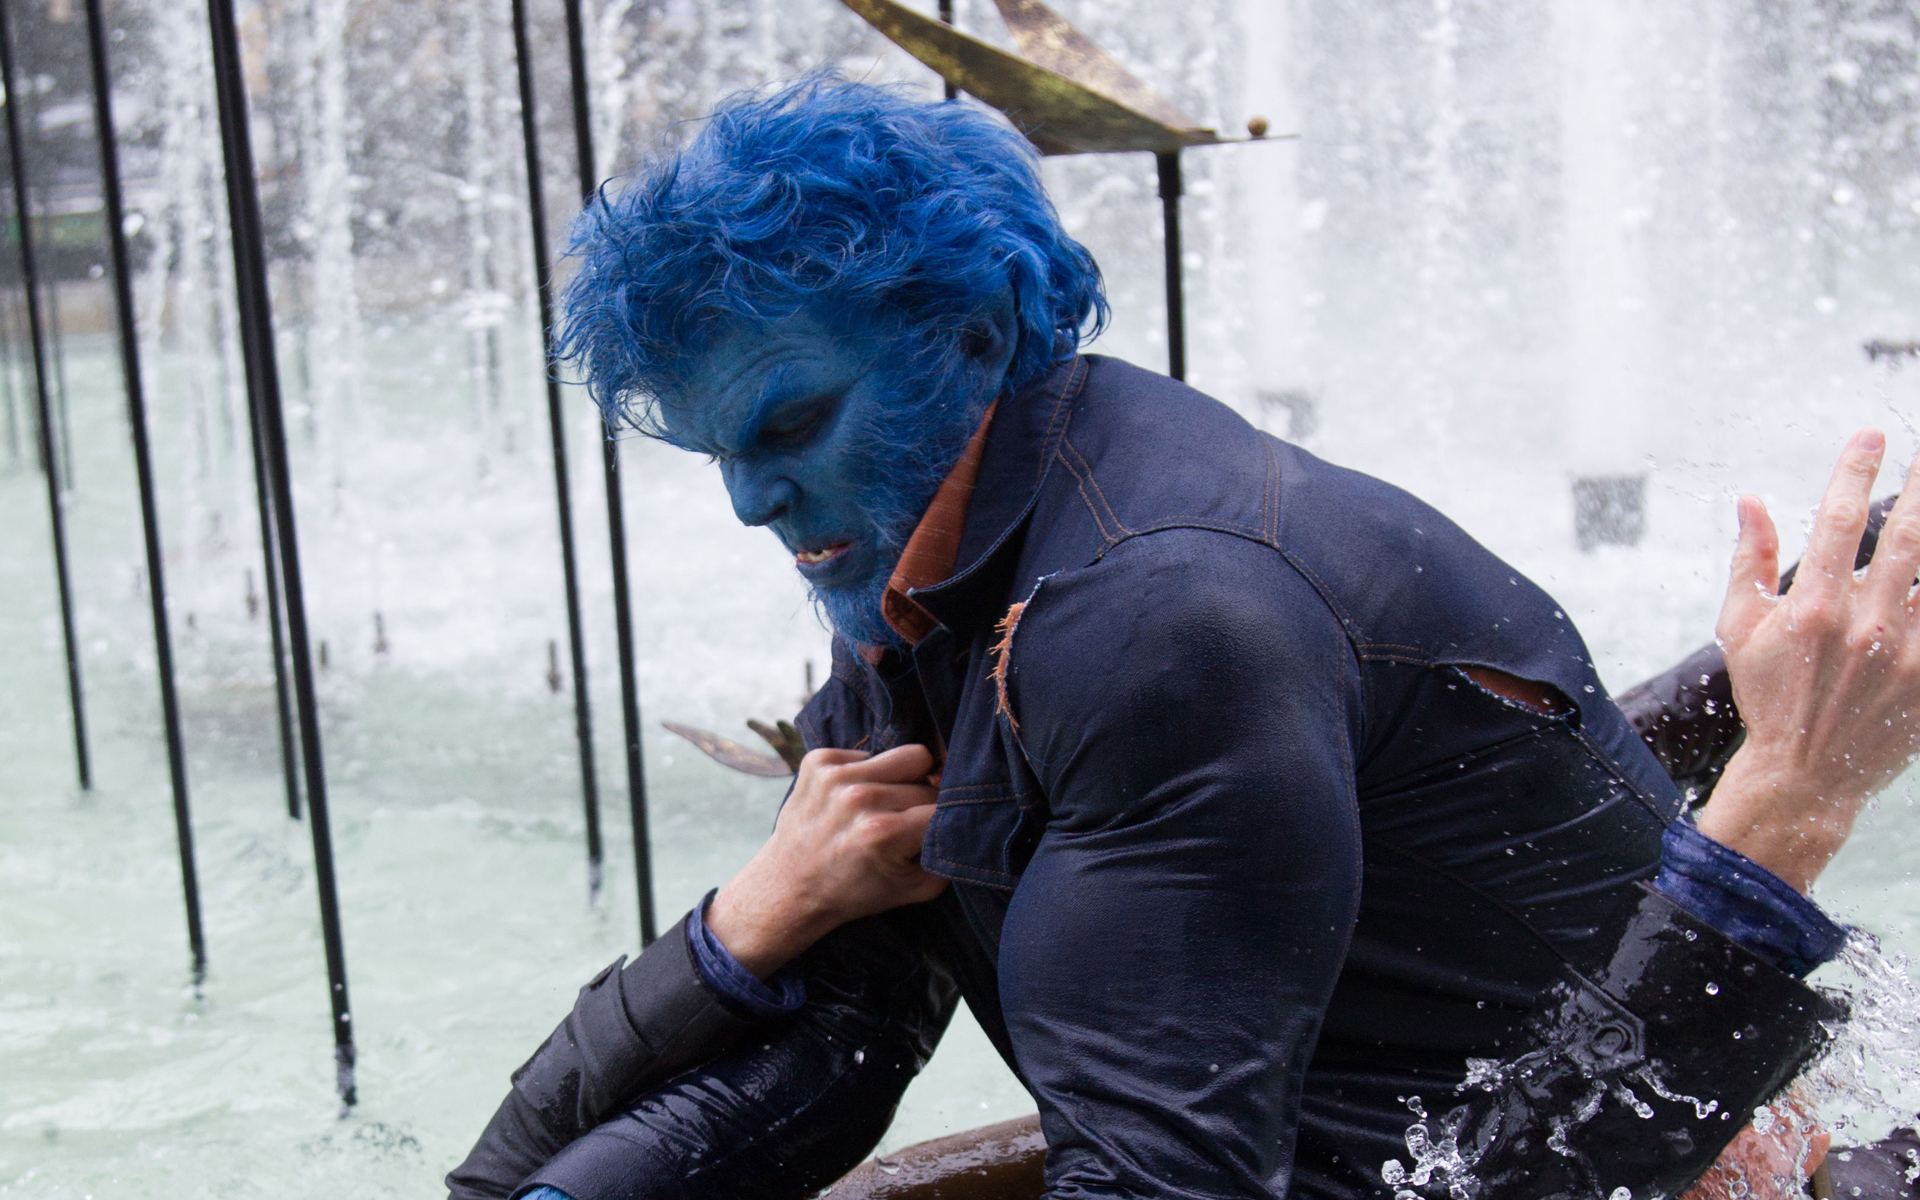 hoult as beast in x men days of future past 2014 movie hd wallpaper 